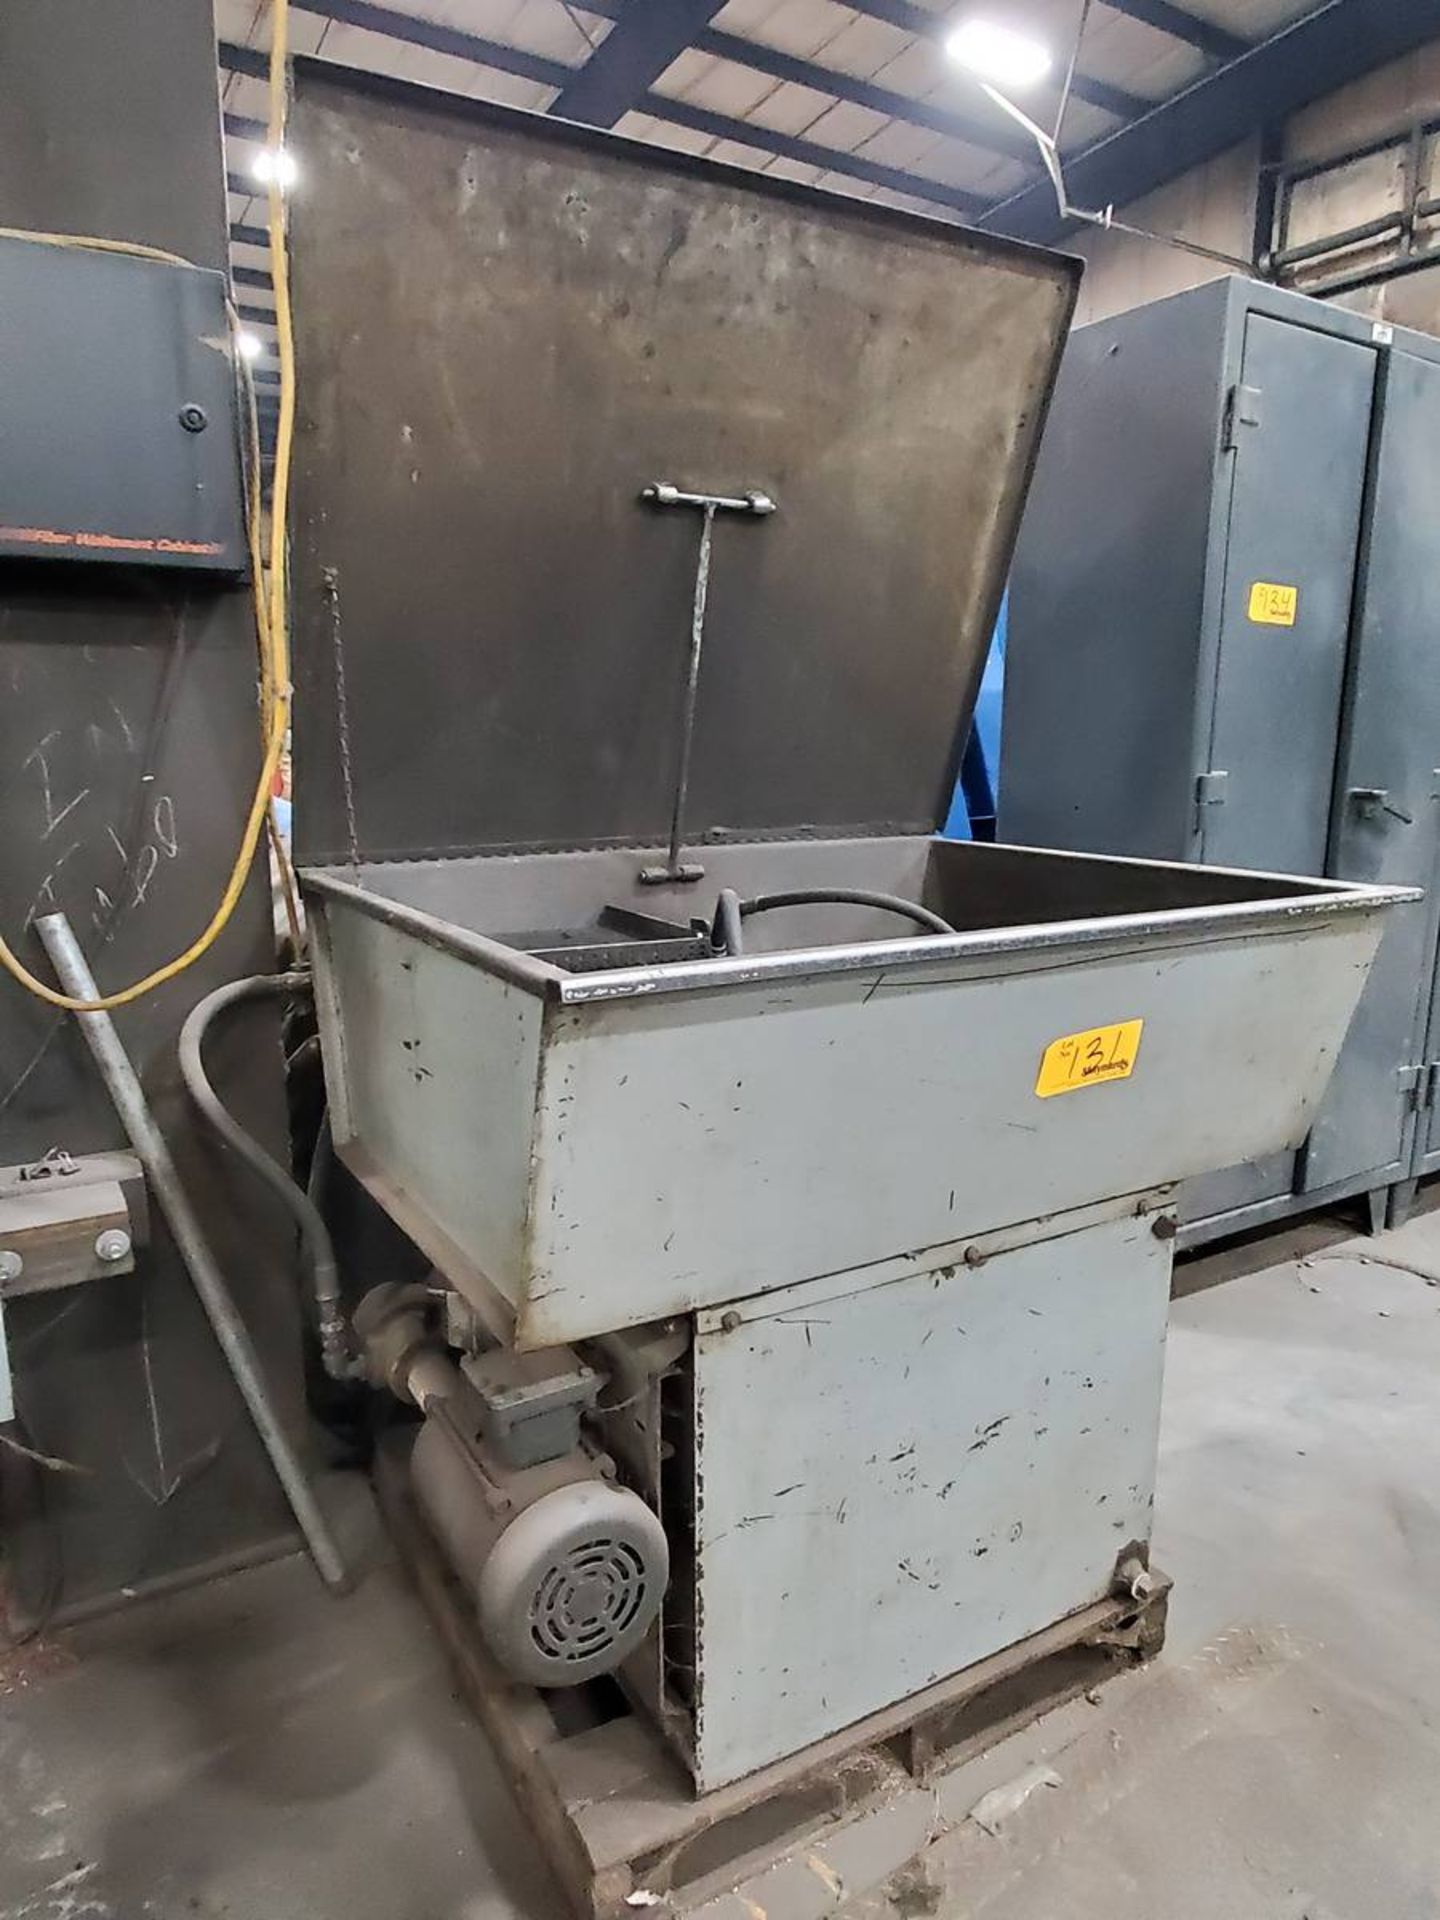 Parts Washer W/ 1/2"HP Motor